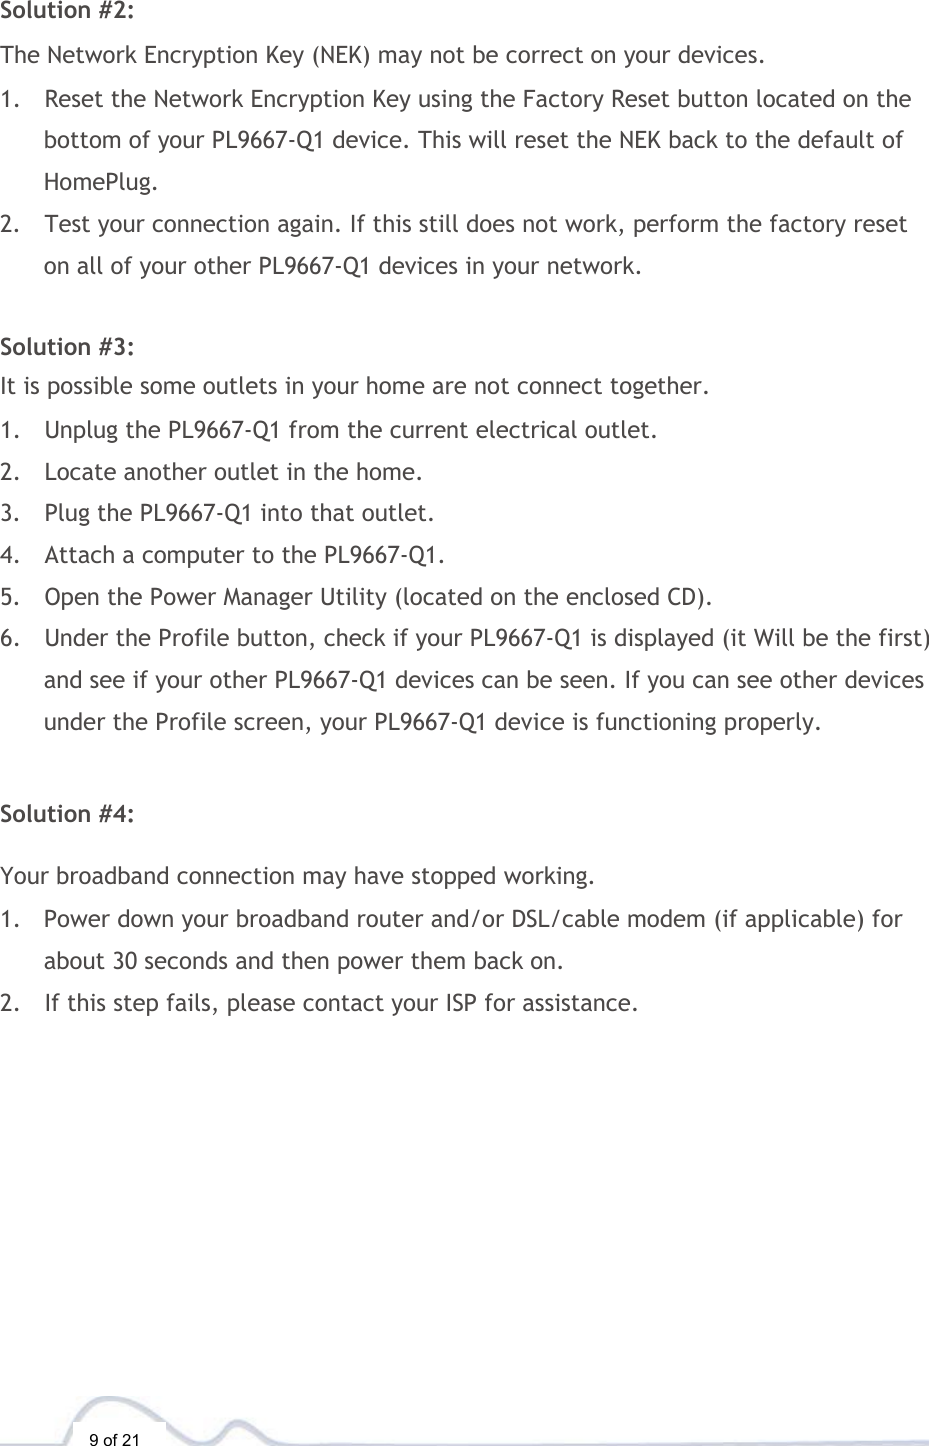  9 of 21  Solution #2:  The Network Encryption Key (NEK) may not be correct on your devices.  1. Reset the Network Encryption Key using the Factory Reset button located on the bottom of your PL9667-Q1 device. This will reset the NEK back to the default of HomePlug. 2. Test your connection again. If this still does not work, perform the factory reset on all of your other PL9667-Q1 devices in your network.   Solution #3:  It is possible some outlets in your home are not connect together.  1. Unplug the PL9667-Q1 from the current electrical outlet. 2. Locate another outlet in the home. 3. Plug the PL9667-Q1 into that outlet. 4. Attach a computer to the PL9667-Q1. 5. Open the Power Manager Utility (located on the enclosed CD). 6. Under the Profile button, check if your PL9667-Q1 is displayed (it Will be the first) and see if your other PL9667-Q1 devices can be seen. If you can see other devices under the Profile screen, your PL9667-Q1 device is functioning properly.   Solution #4:  Your broadband connection may have stopped working.  1. Power down your broadband router and/or DSL/cable modem (if applicable) for about 30 seconds and then power them back on. 2. If this step fails, please contact your ISP for assistance. 